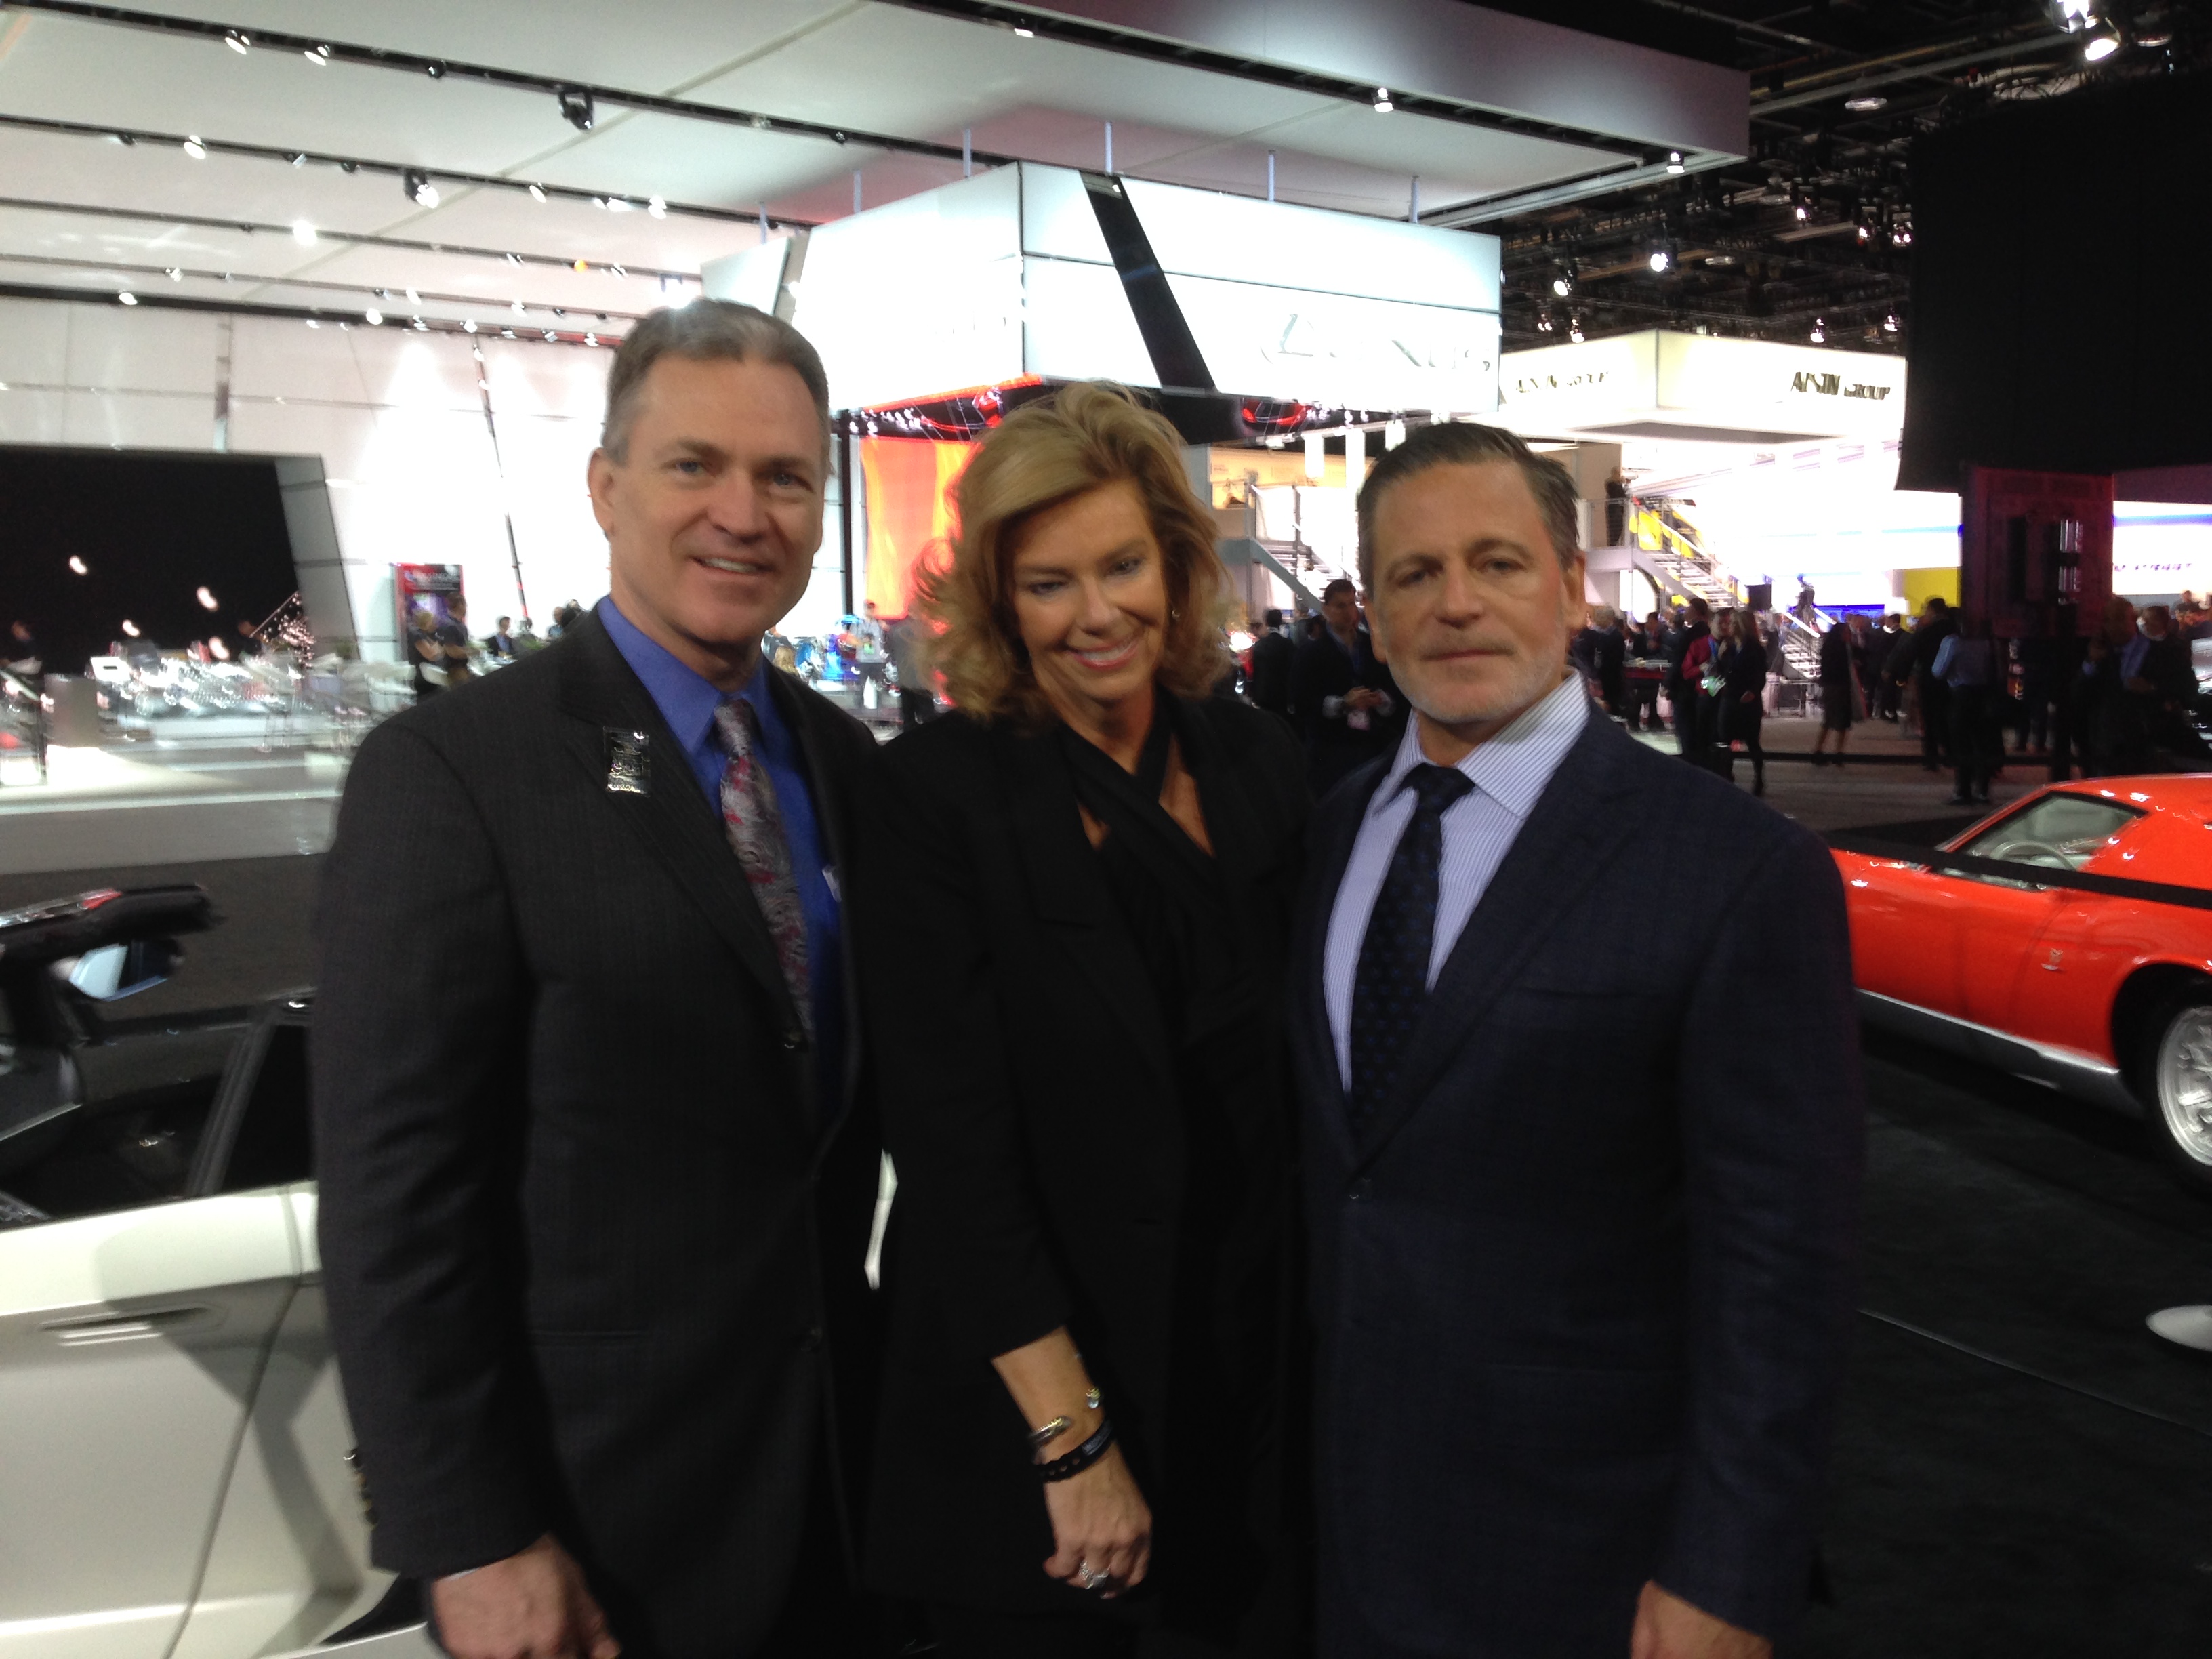 Rod Alberts, Carol Cain and Dan Gilbert at 2016 NAIAS at the Robb Report exhibit at Cobo Center.  That exhibit has Rolls-Royce and other luxury items on display. (credit: Derek Fawaz/CBS 62)